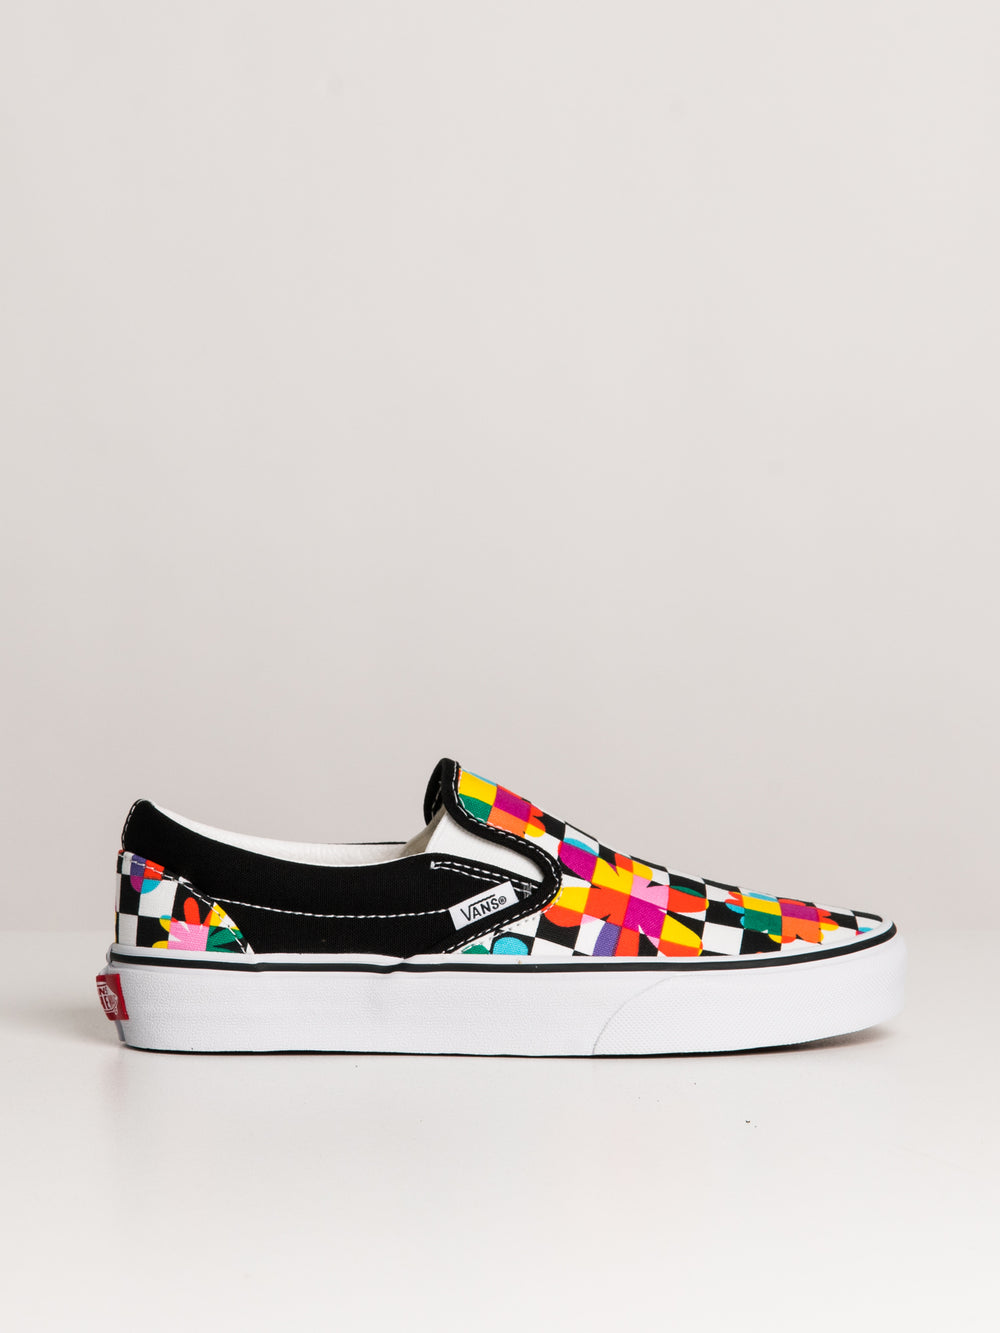 WOMENS VANS CLASSIC SLIP ON FLORAL CHECKER SNEAKER - CLEARANCE